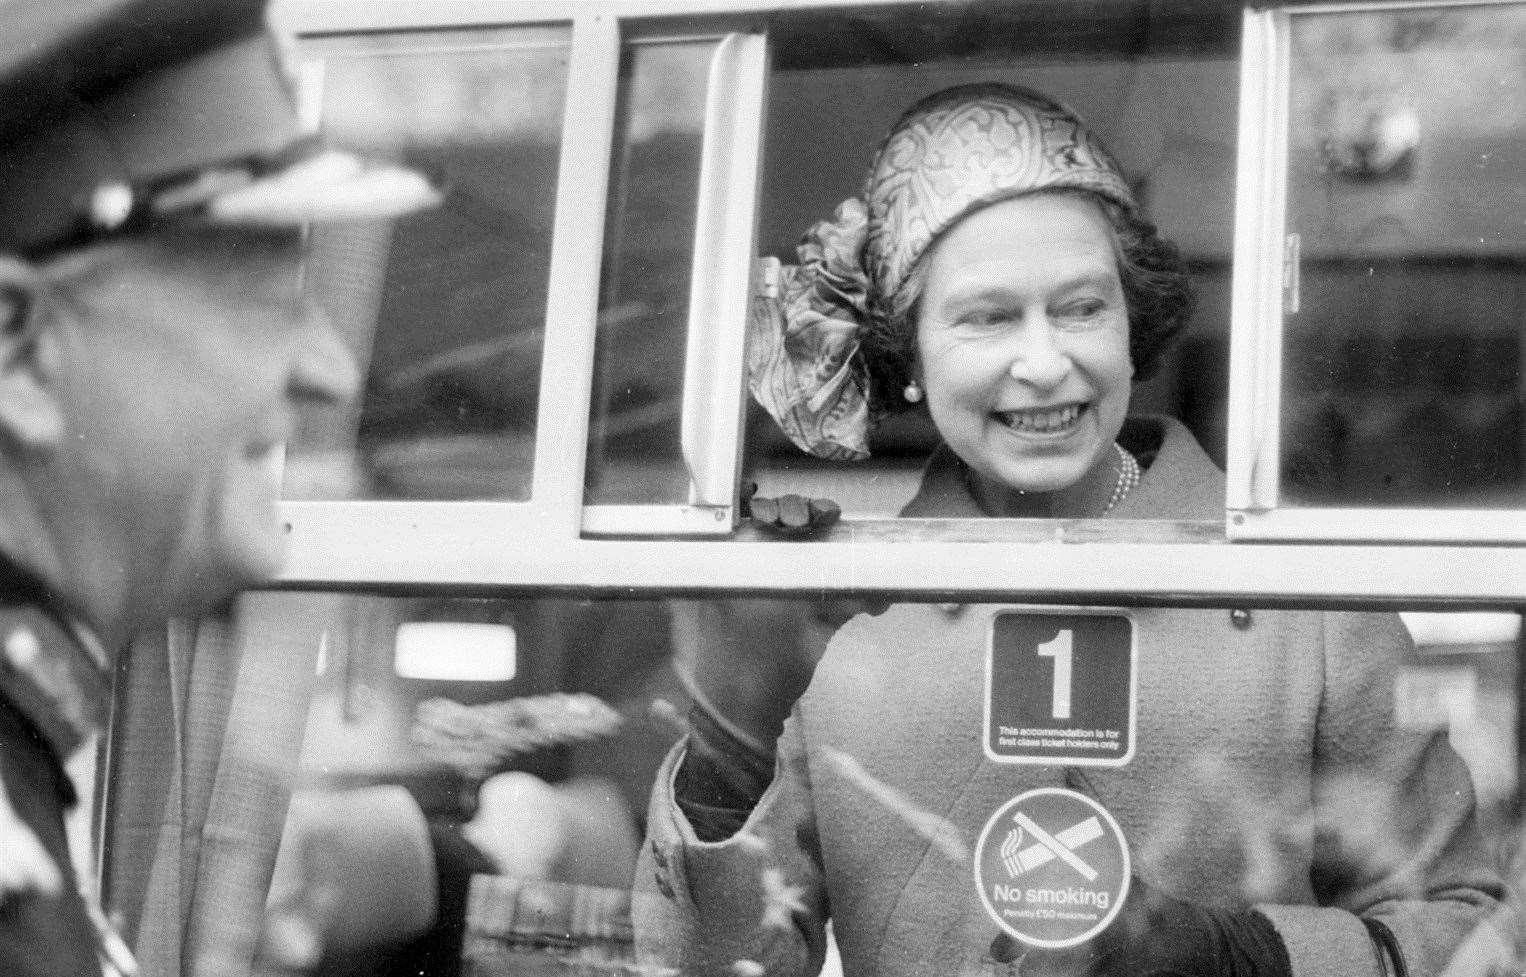 The Queen at Maidstone East Station following a visit to Leeds Castle in March 1981 - three months before the Trooping of the Colour